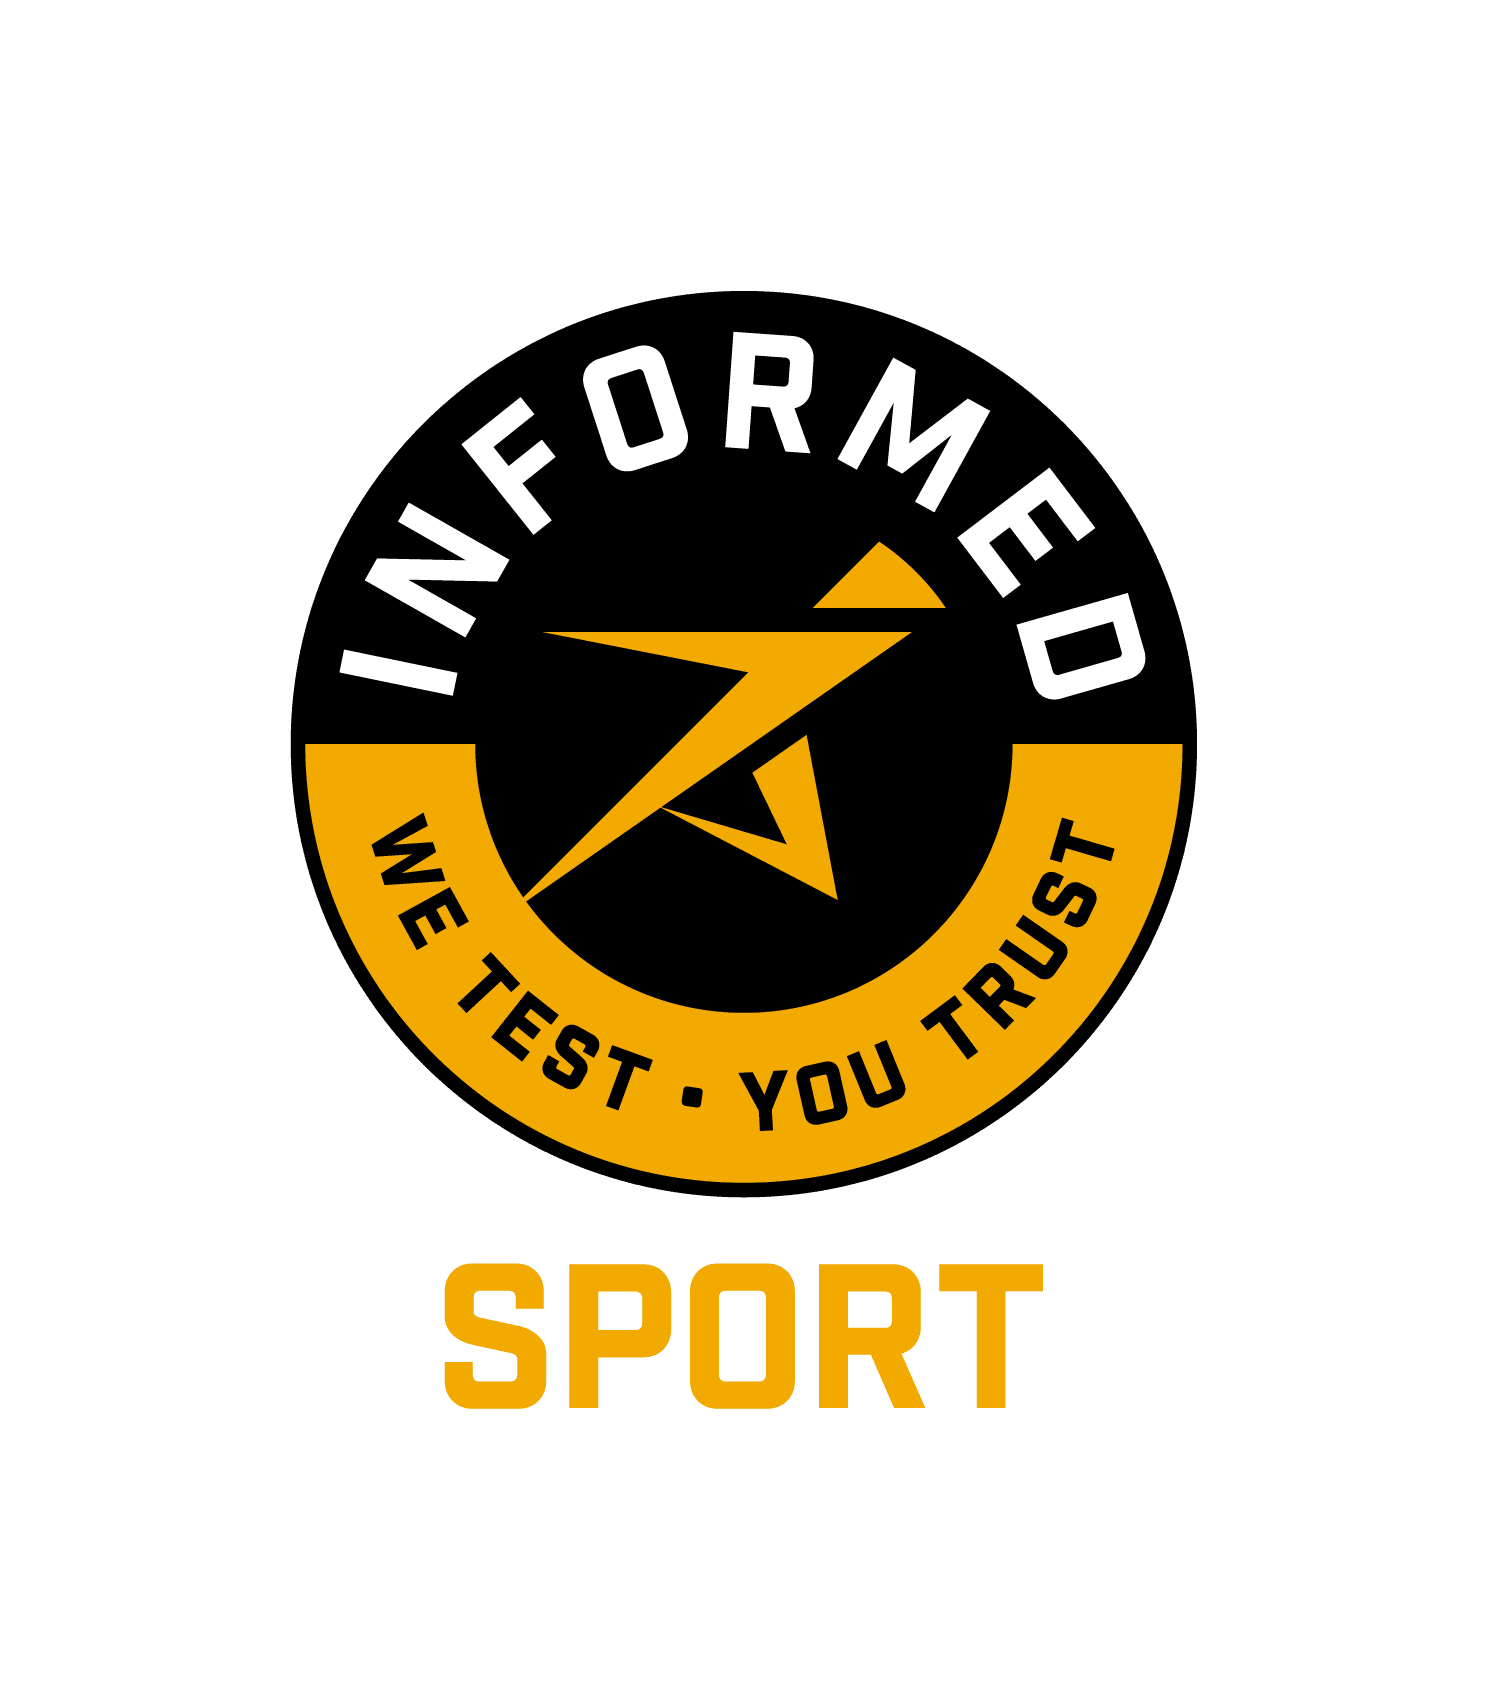 Informed Sport Certified logo, indicating quality assurance for athletic supplements.